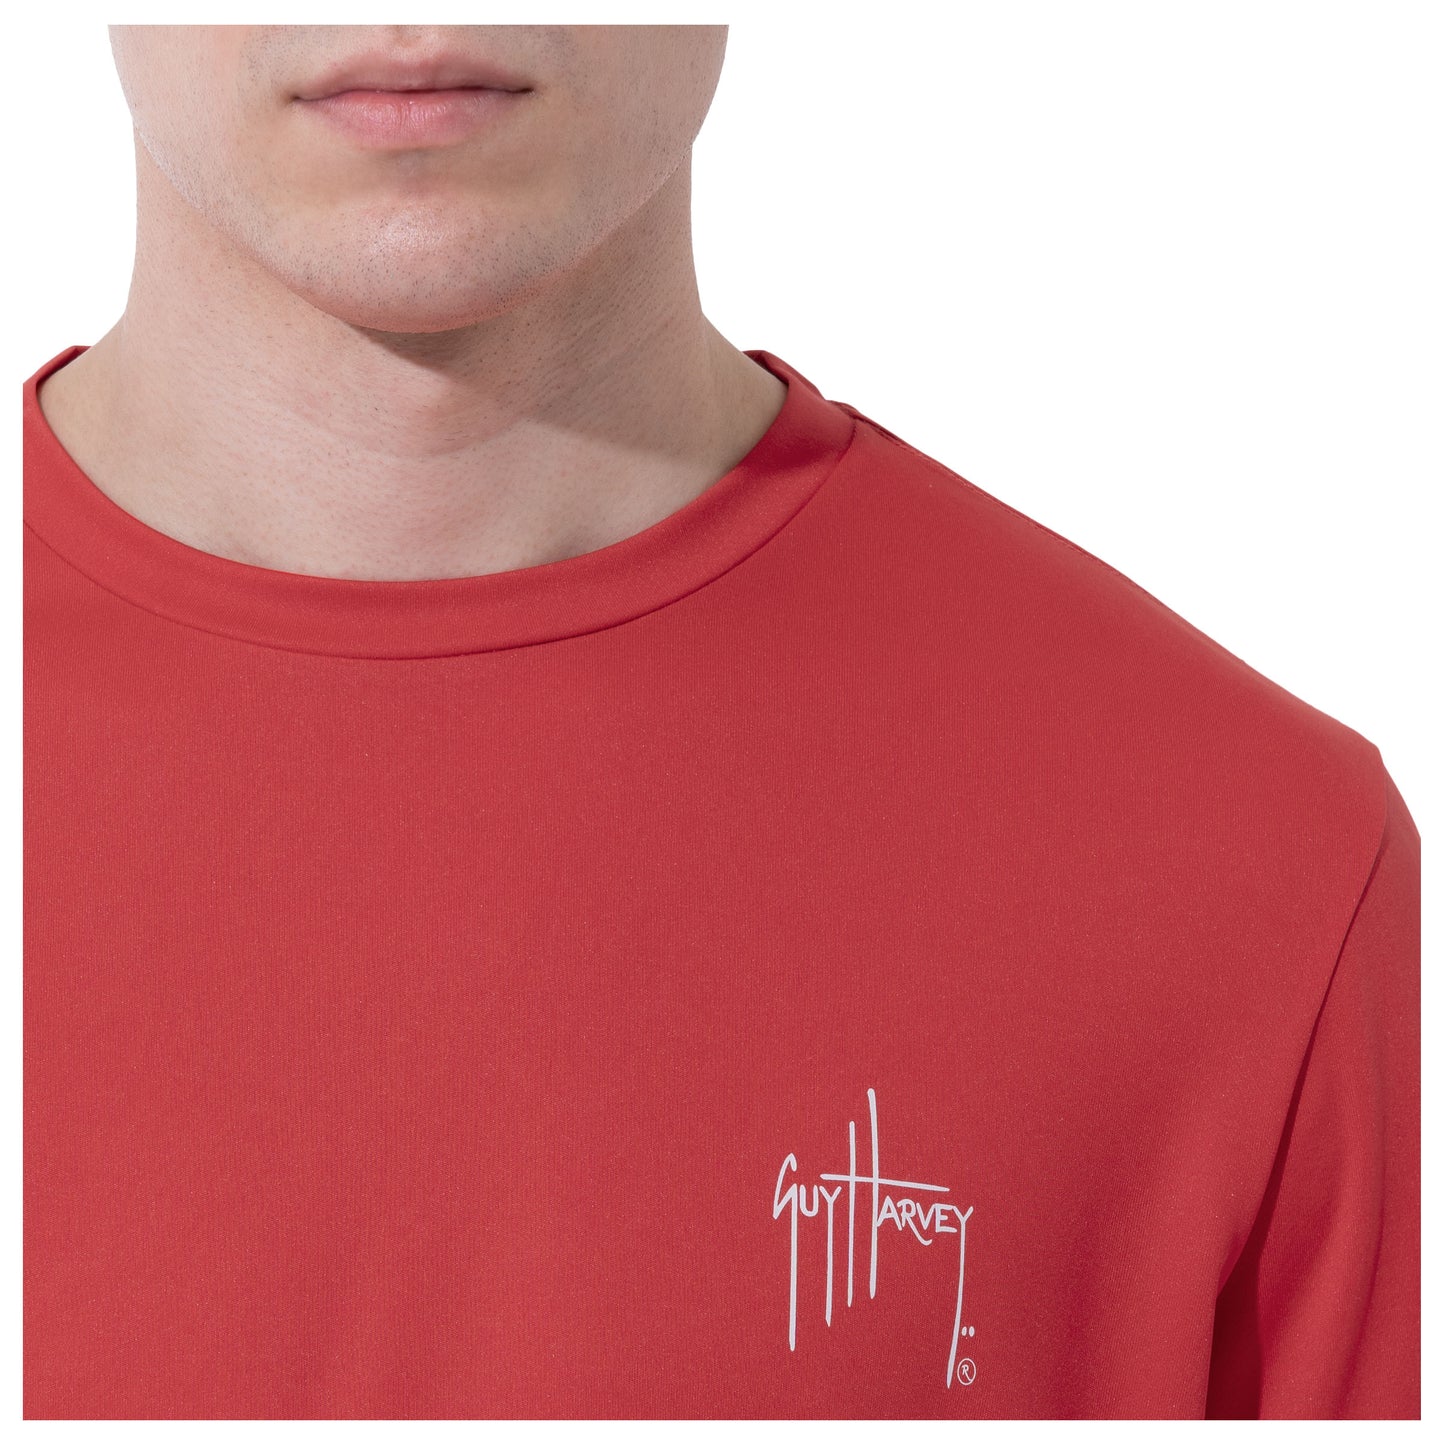 Men Long Sleeve Performance Fishing Sun Protection with UPF 50 Plus. Color Red Guy Harvey Signature on chest View 16